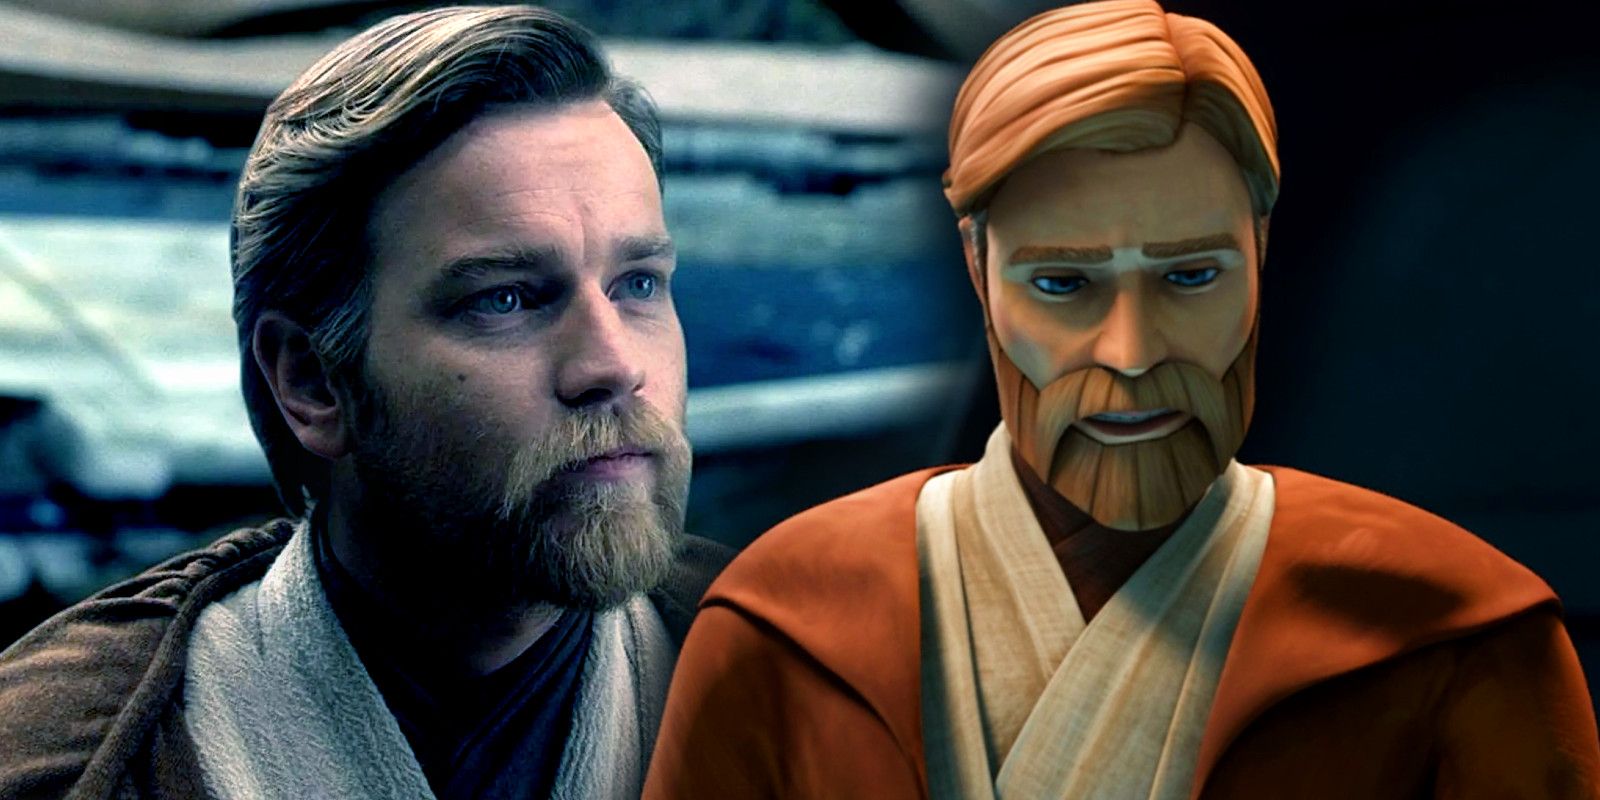 One Clone Wars Scene Completely Rewrote Obi-Wan's Entire Star Wars Character Arc